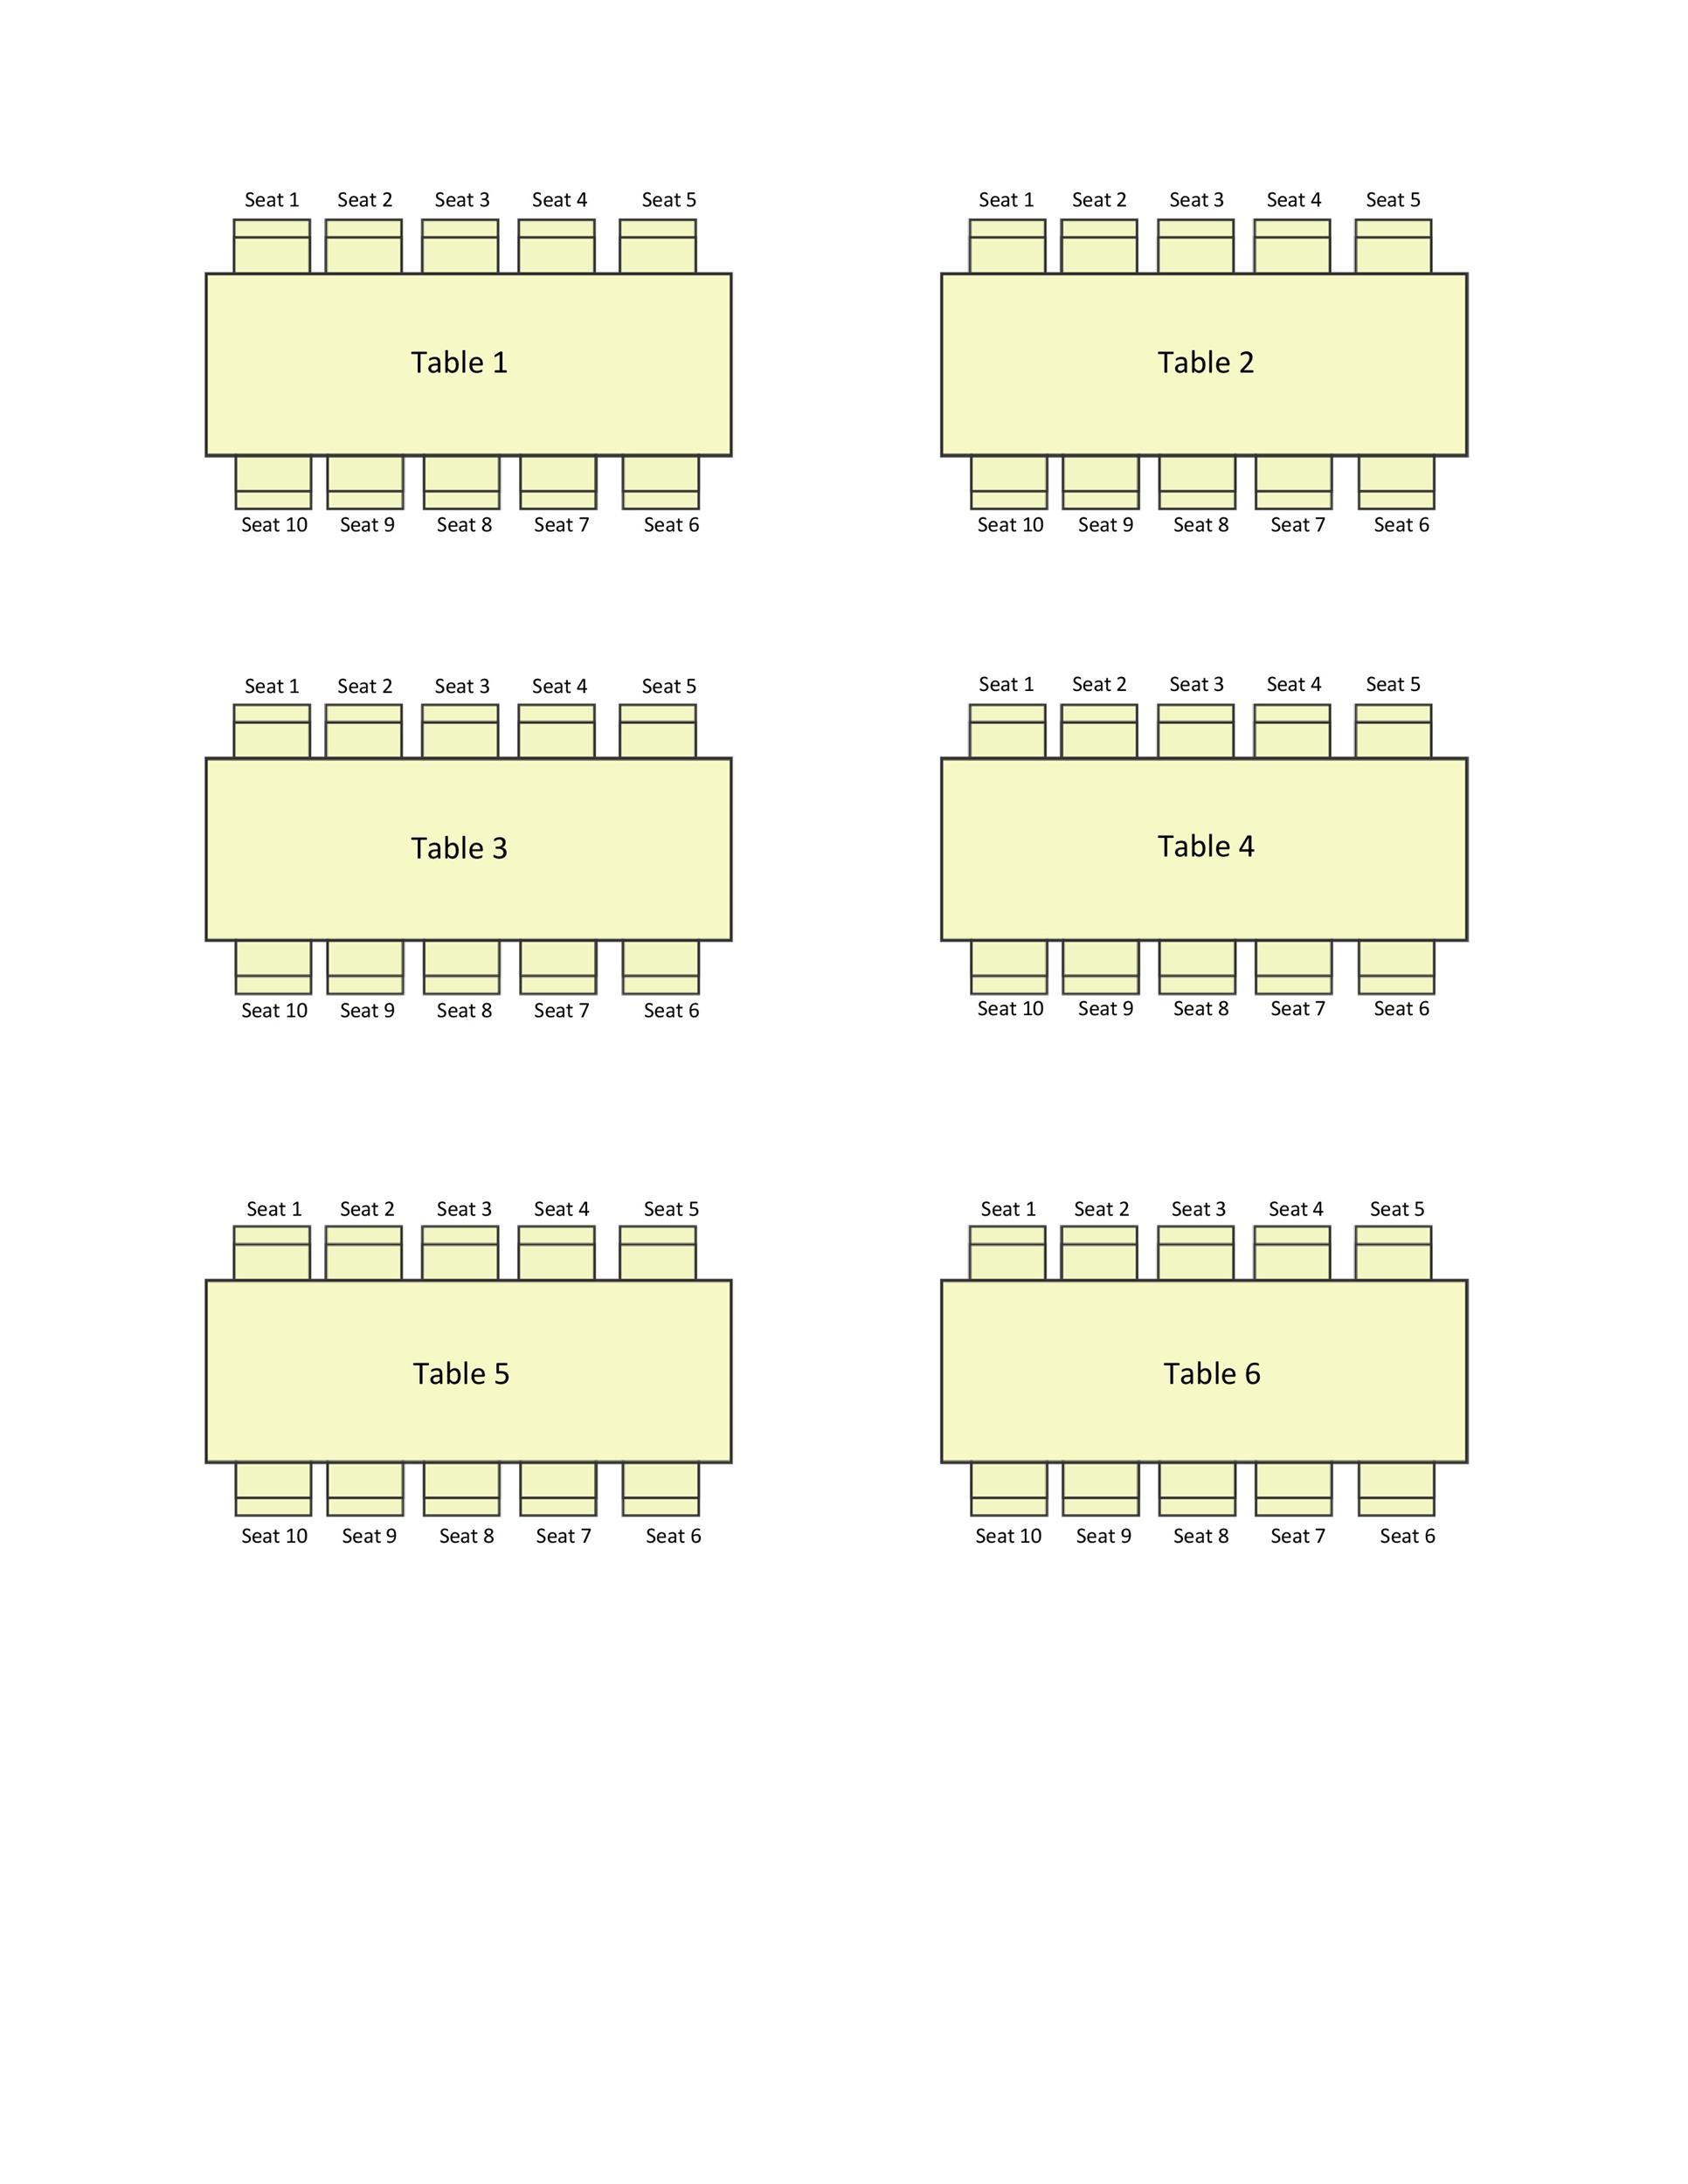 Wedding Seating Chart Template Long Tables